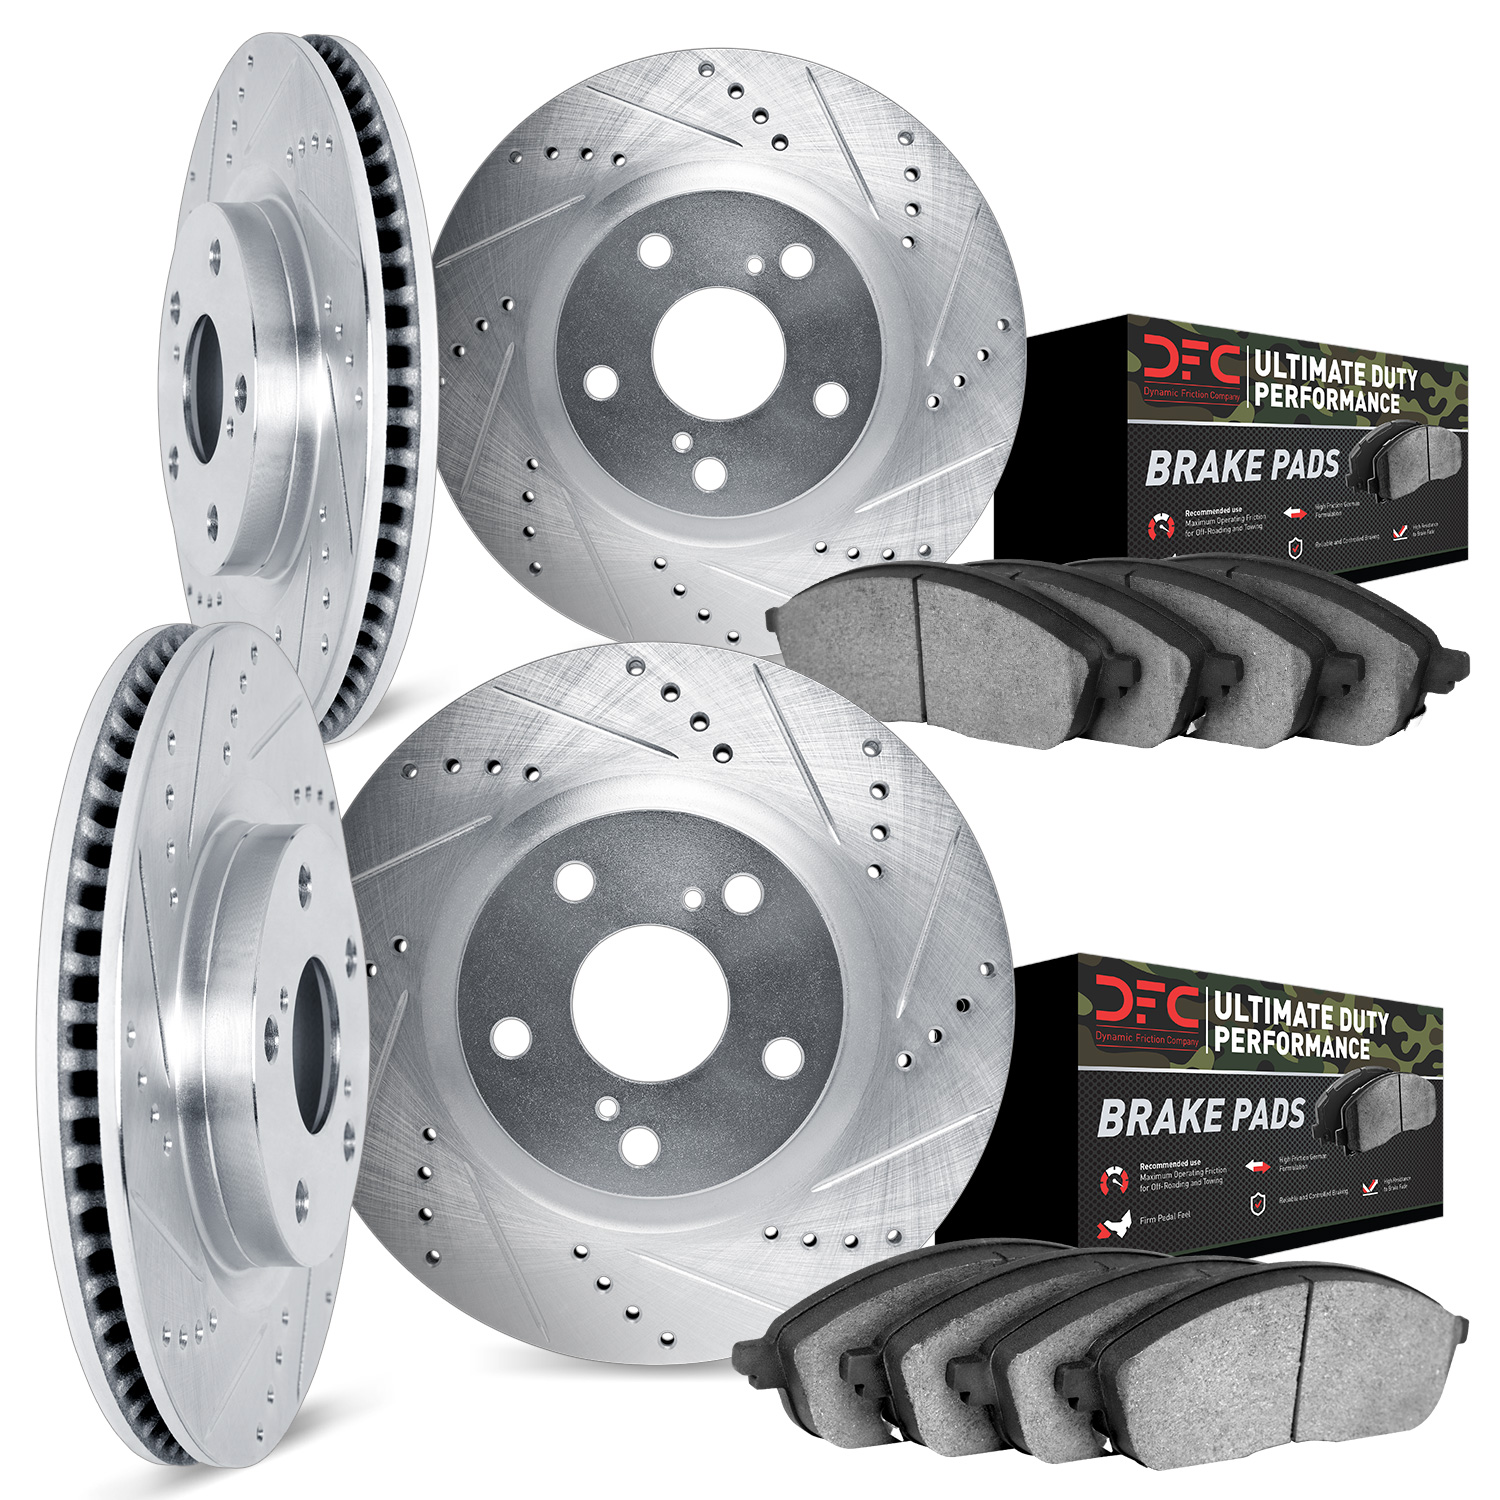 7404-26001 Drilled/Slotted Brake Rotors with Ultimate-Duty Brake Pads Kit [Silver], 2012-2013 Tesla, Position: Front and Rear